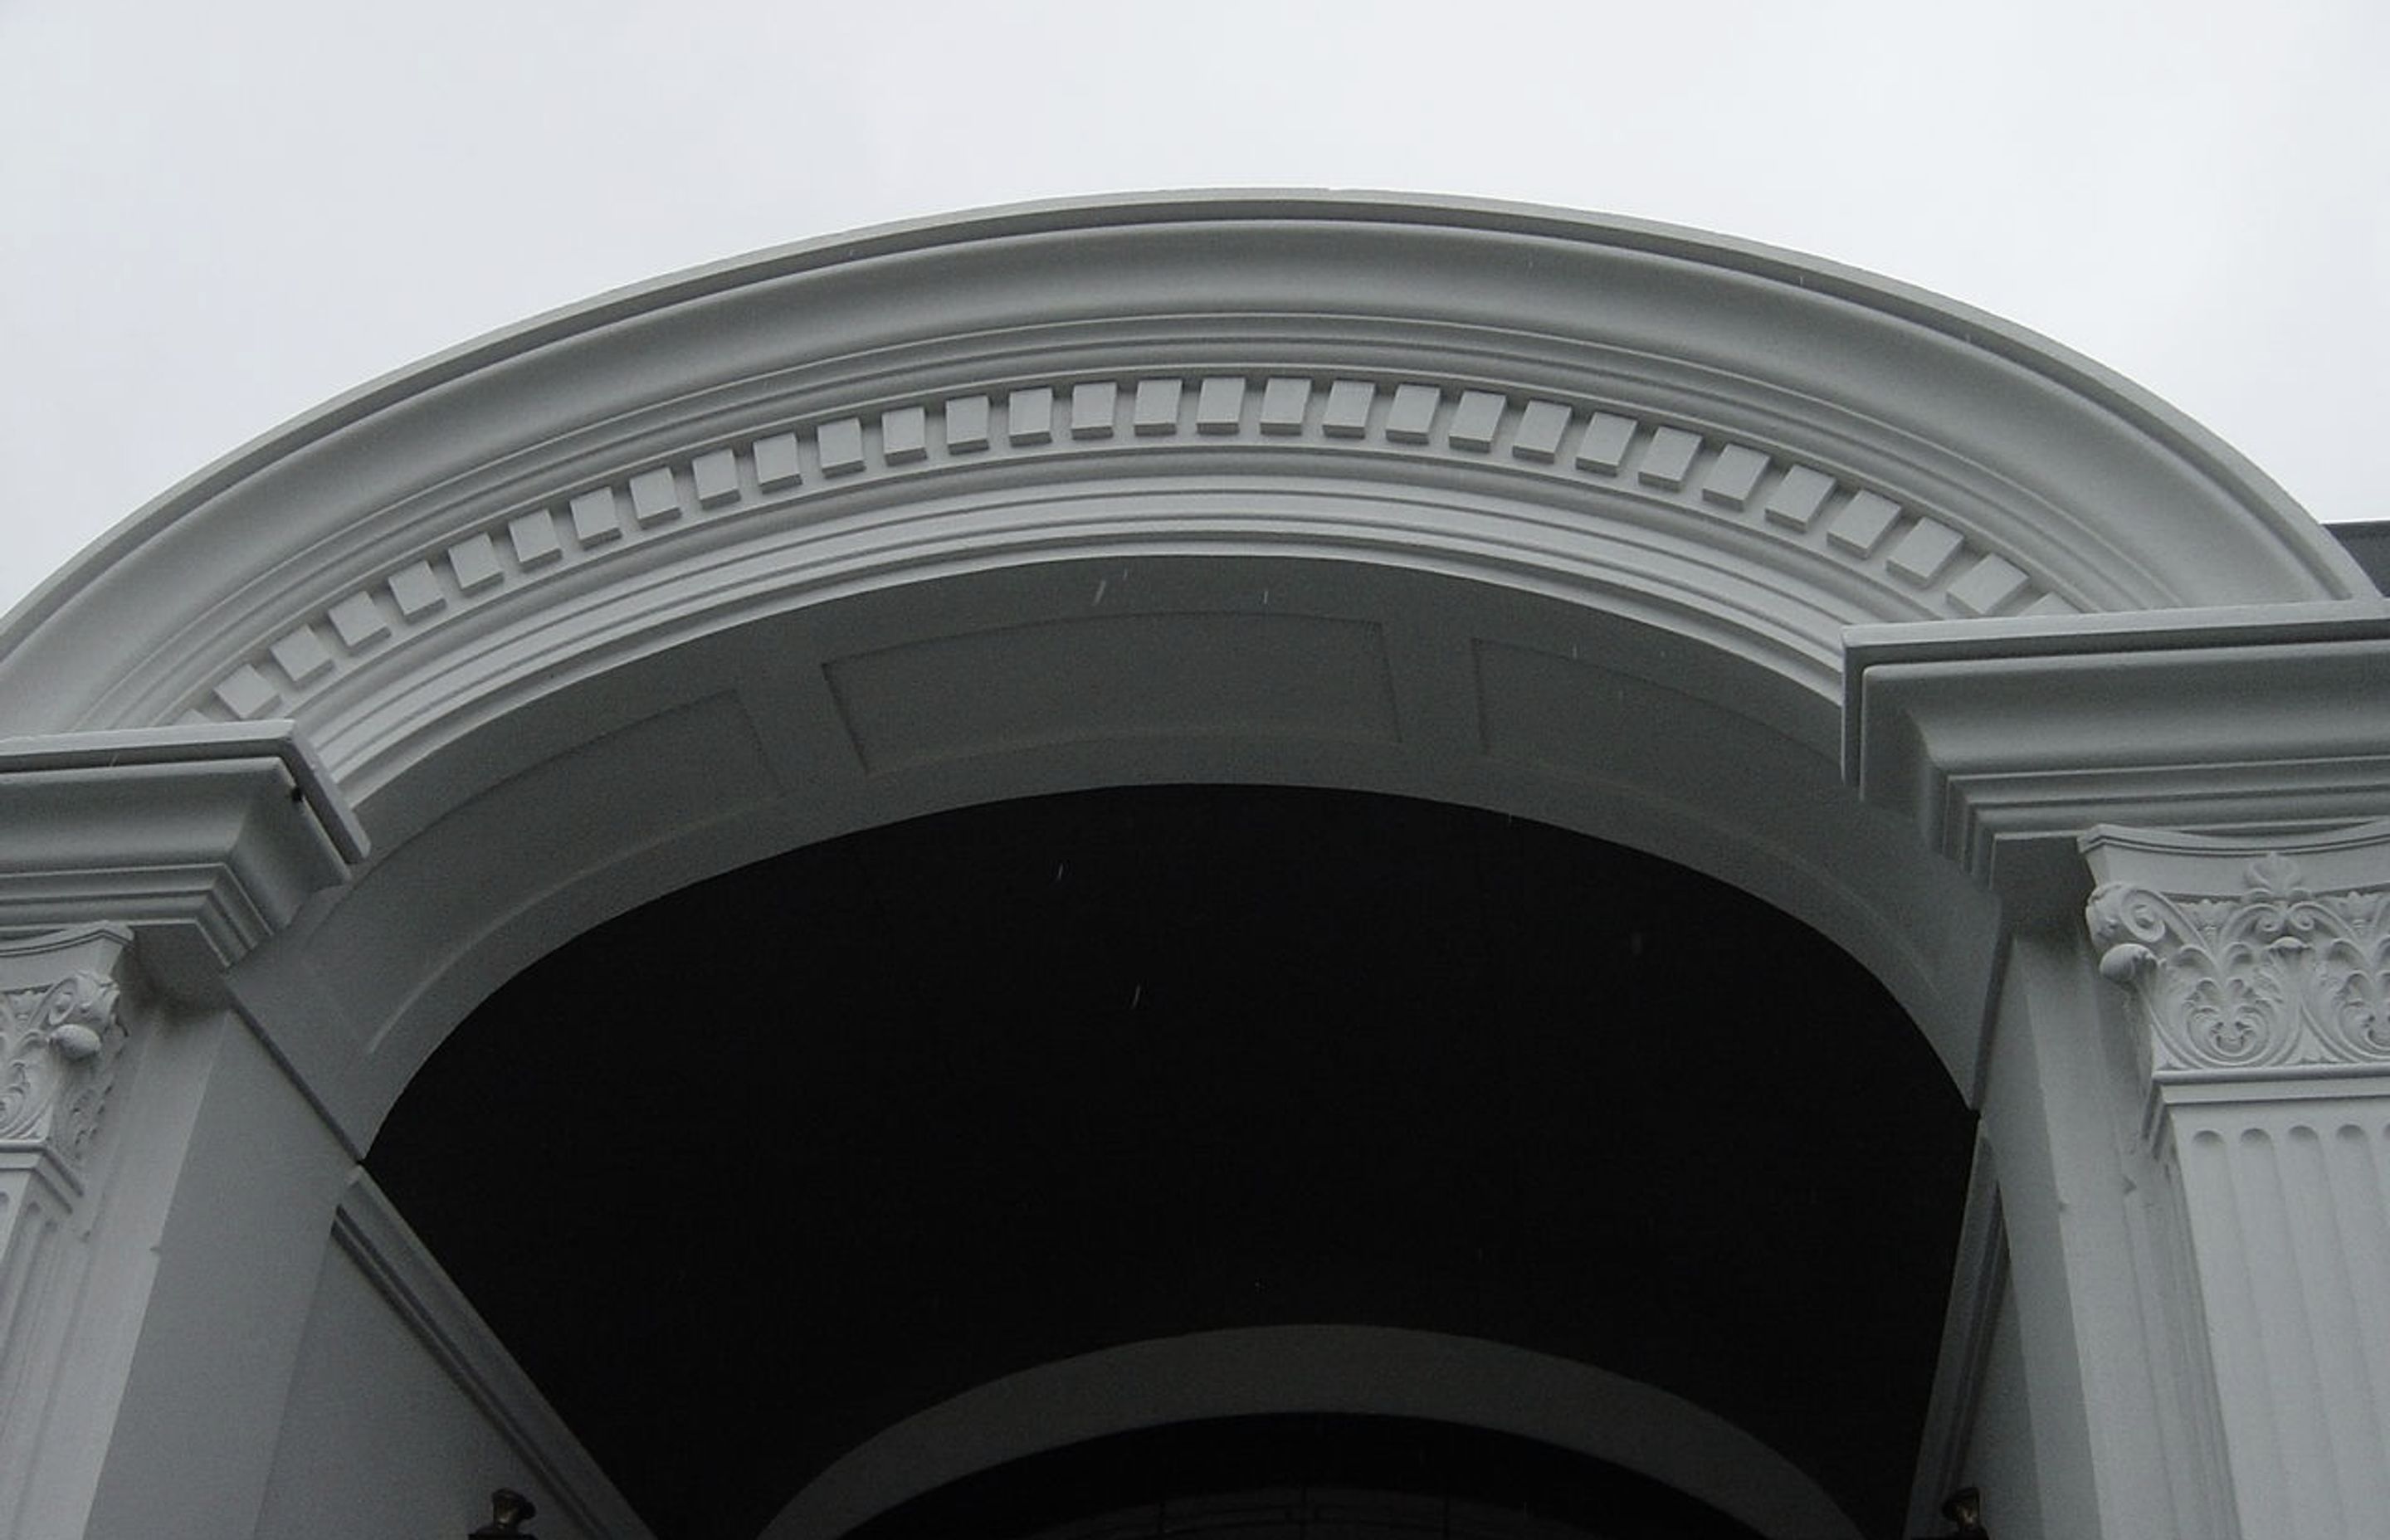 Entrance with cornice moulding